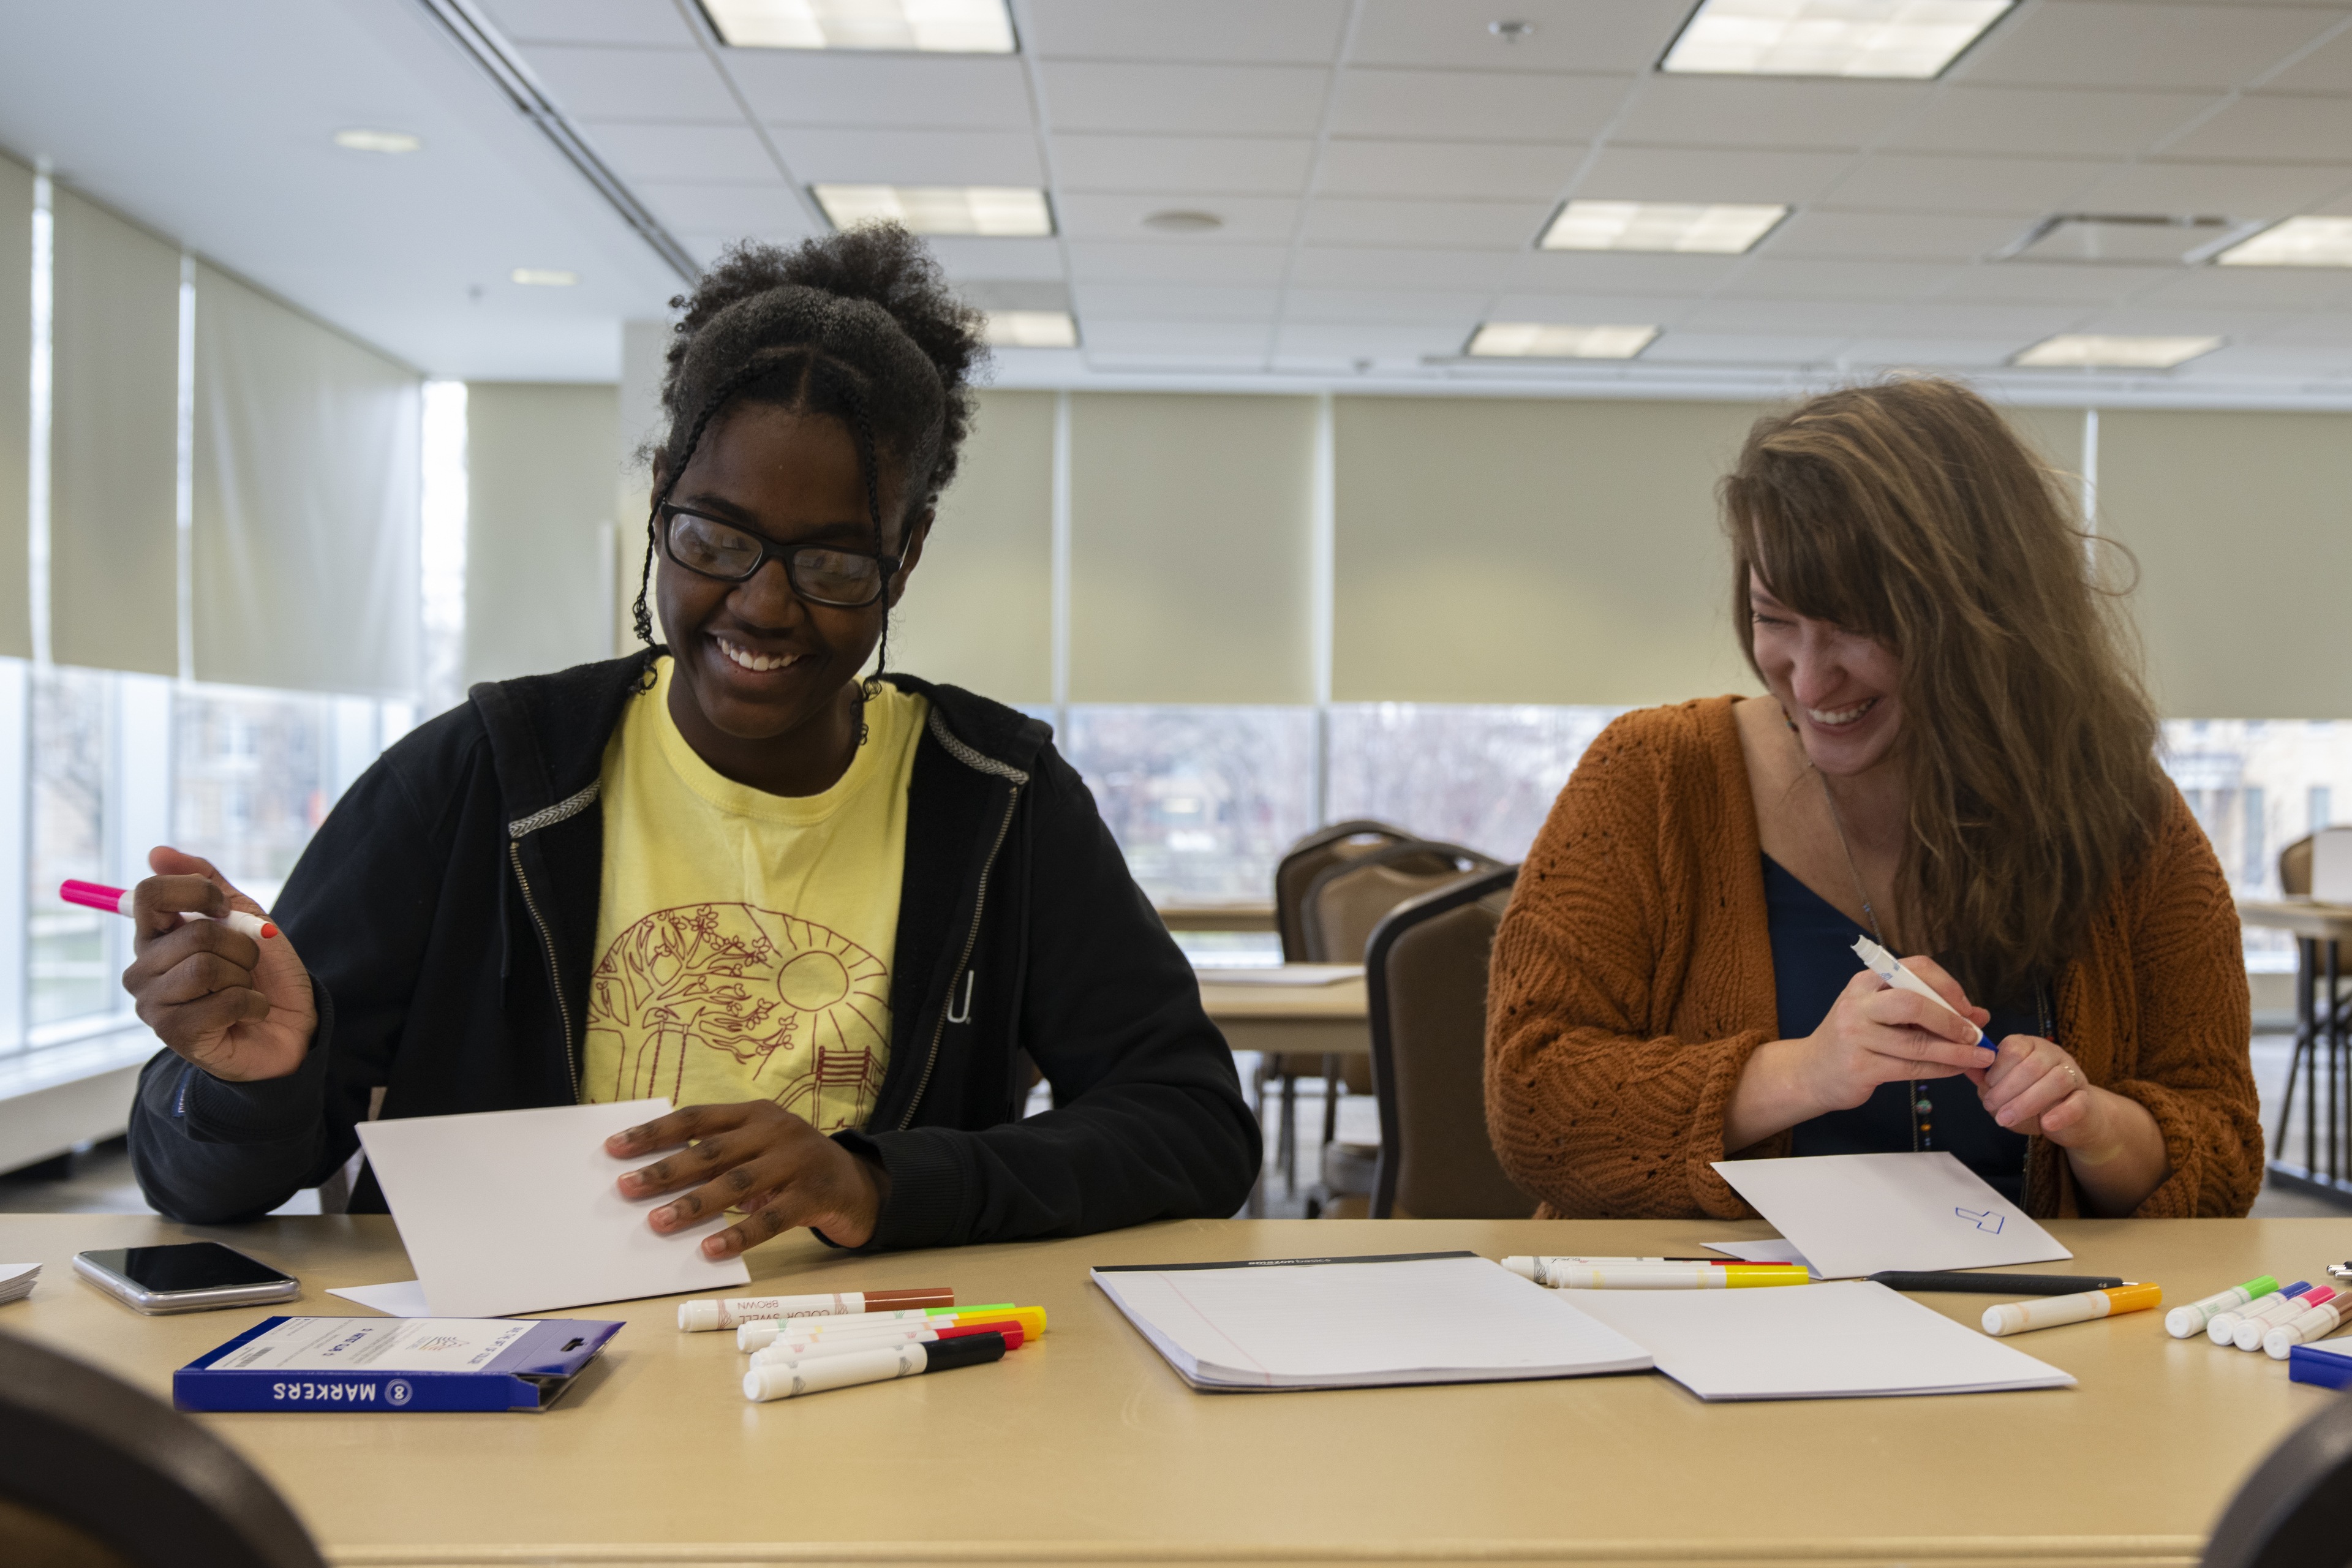 Two students smile while writing letters